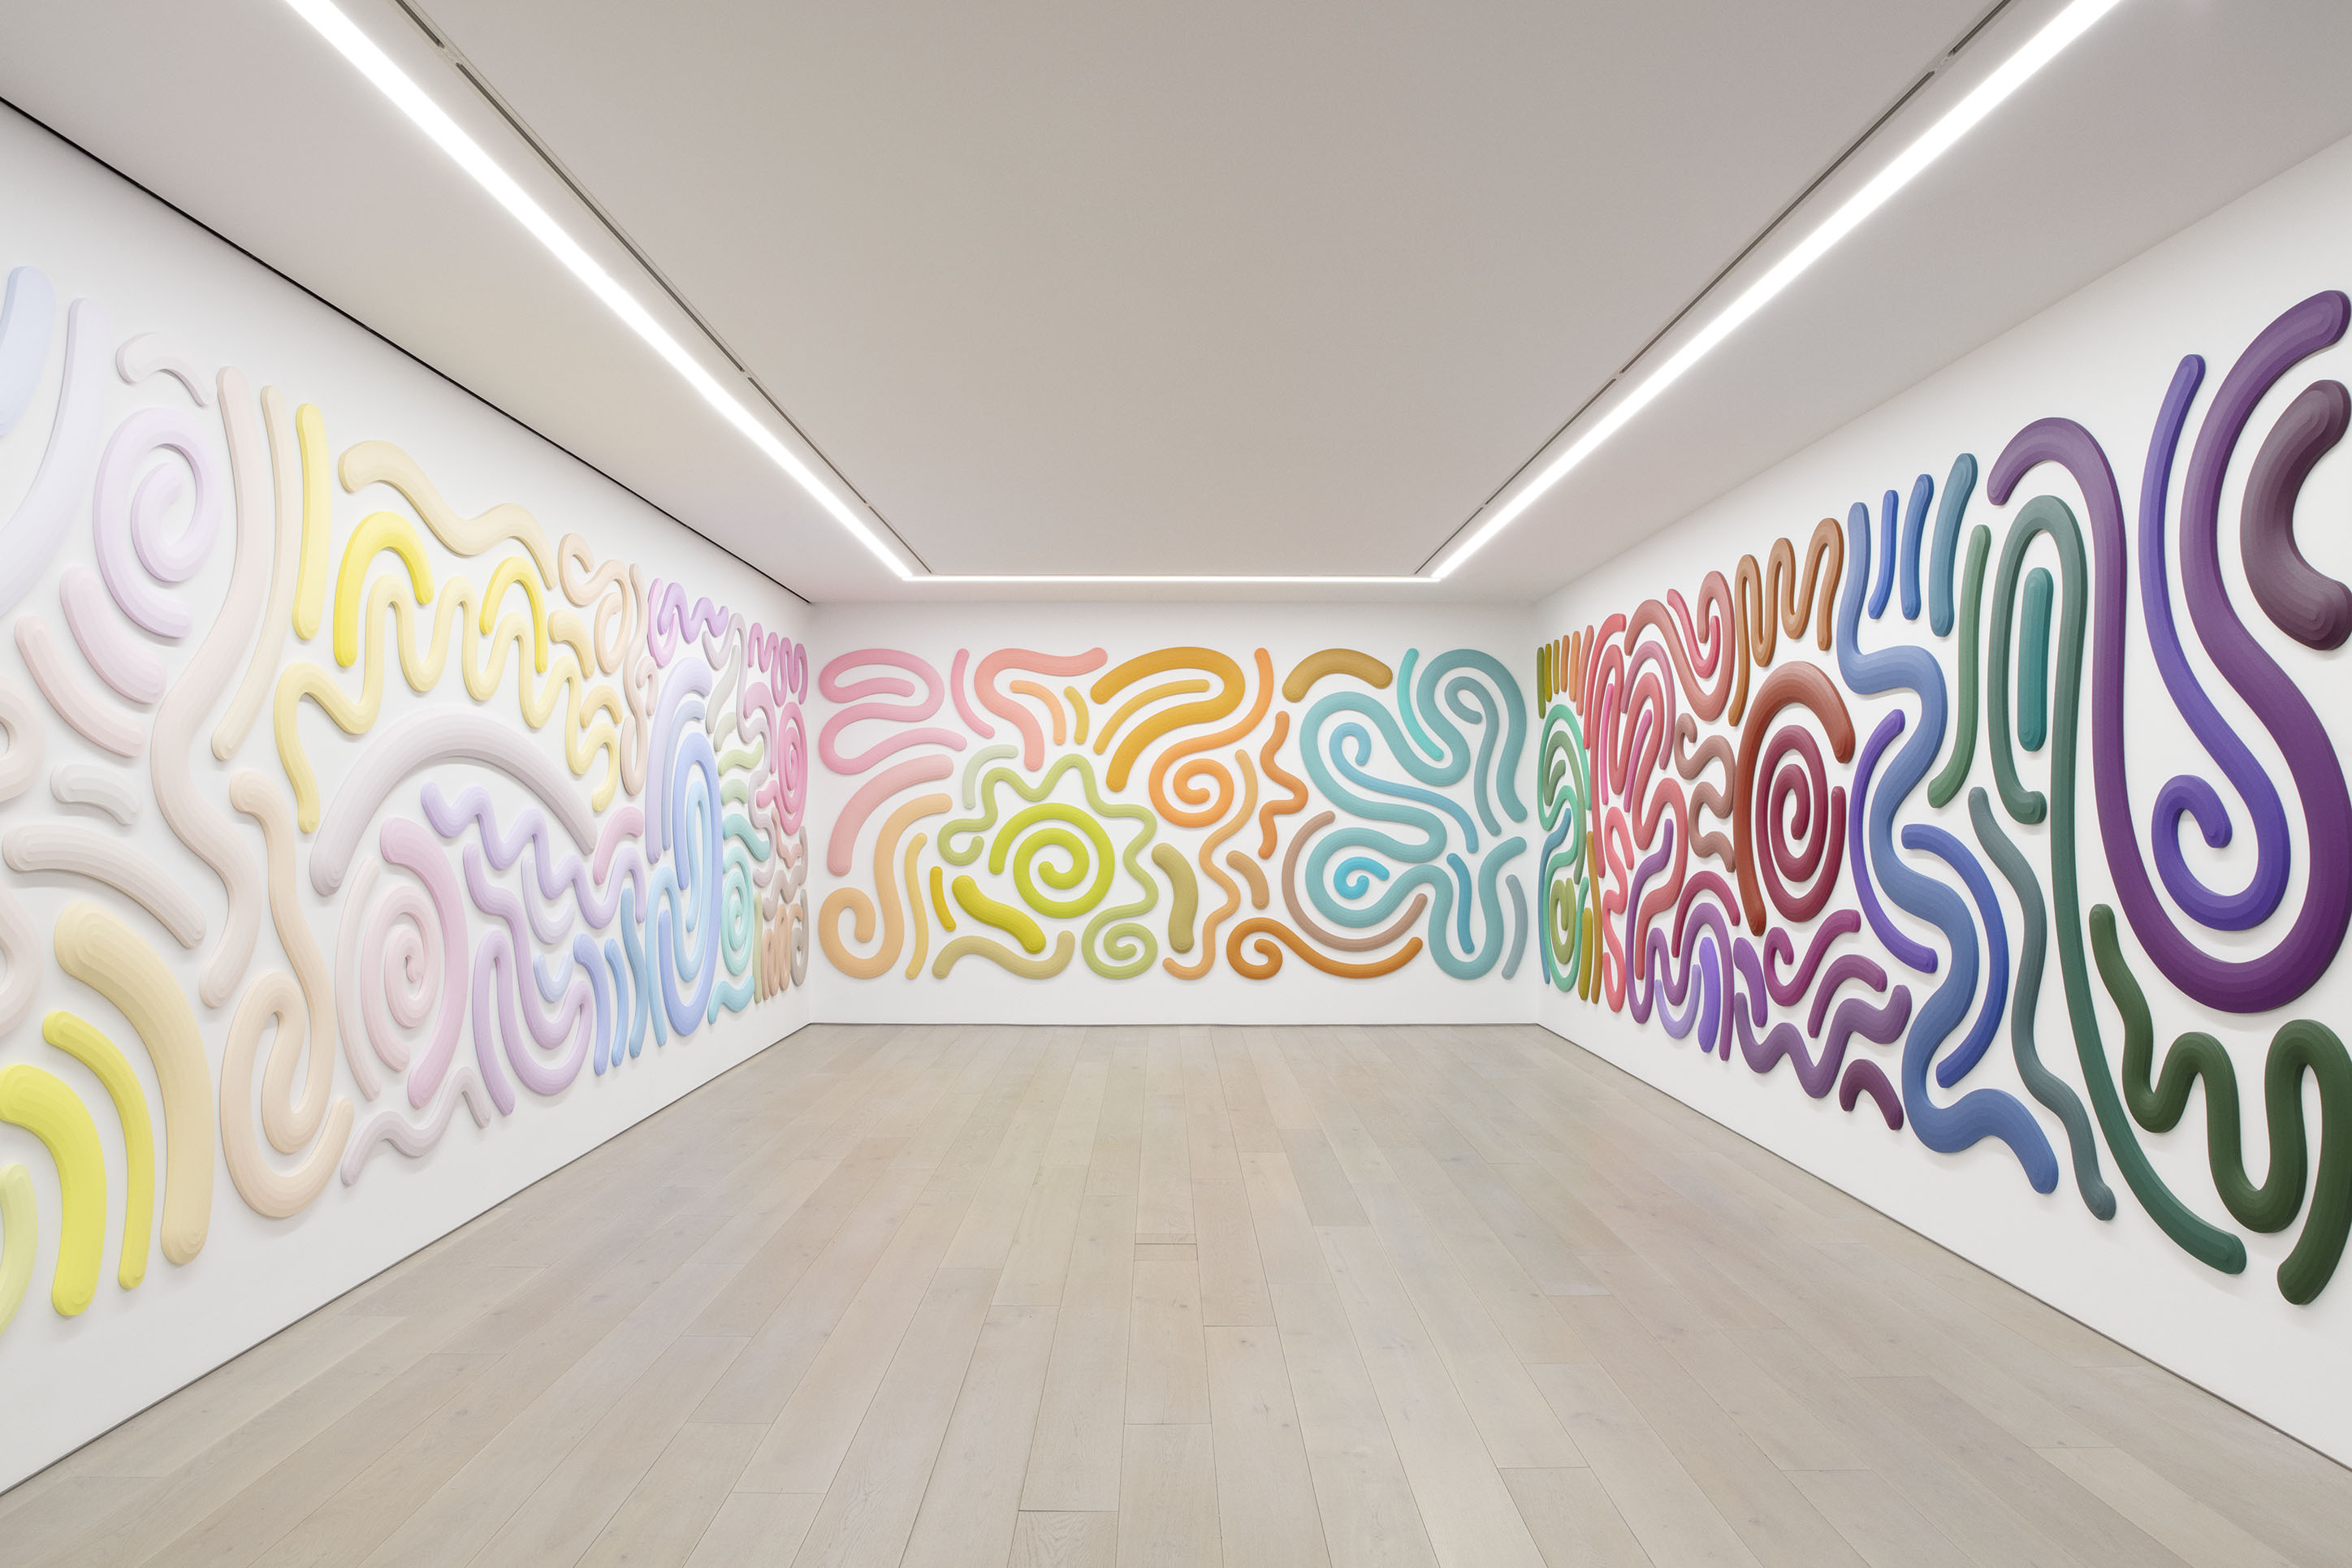 View of Josh Sperling's exhibition "Daydream" at Perrotin New York, 2022. Courtesy of the artist and Perrotin.